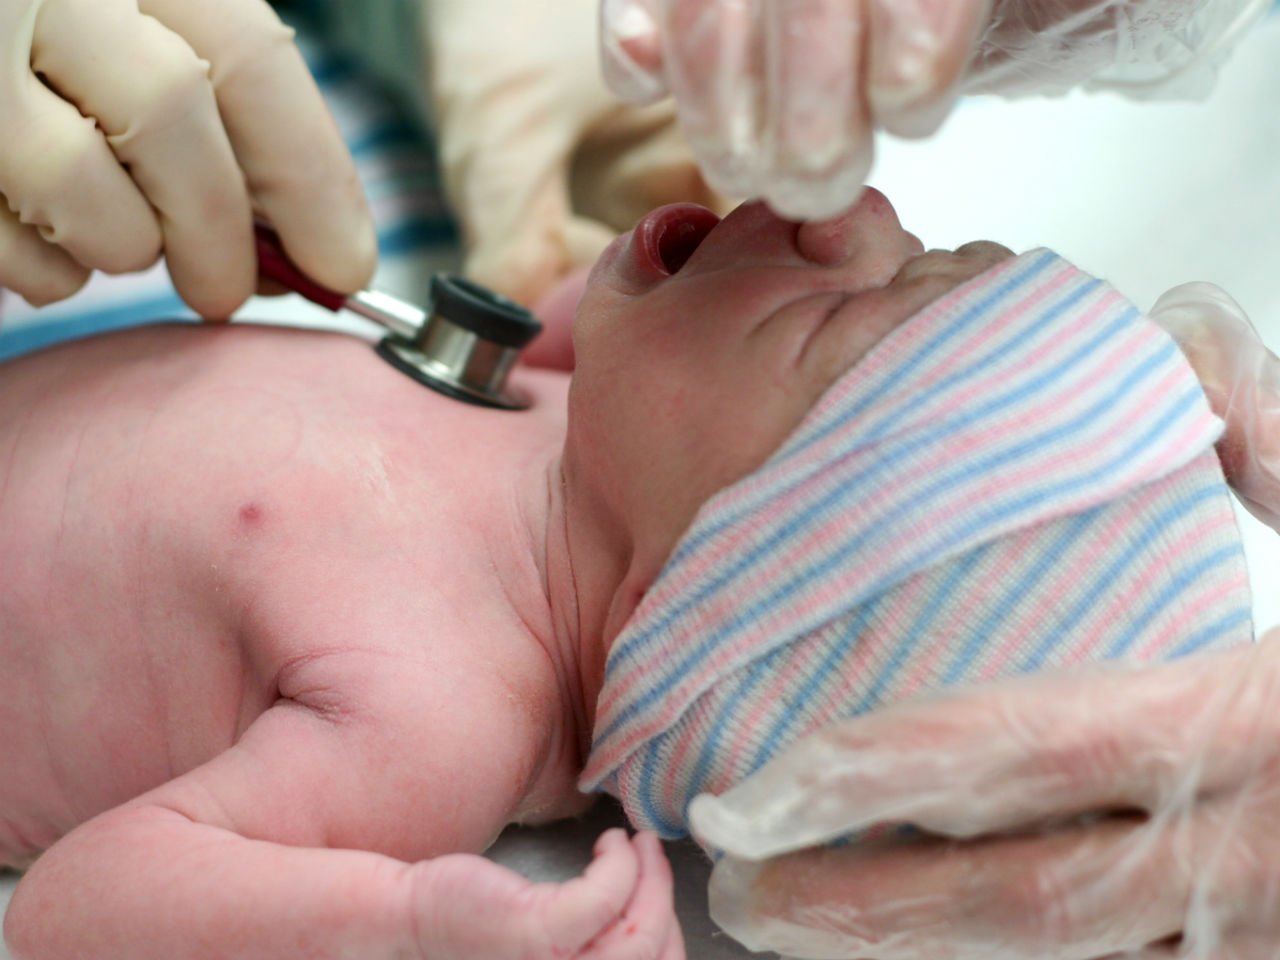 Newborn getting tested by doctor